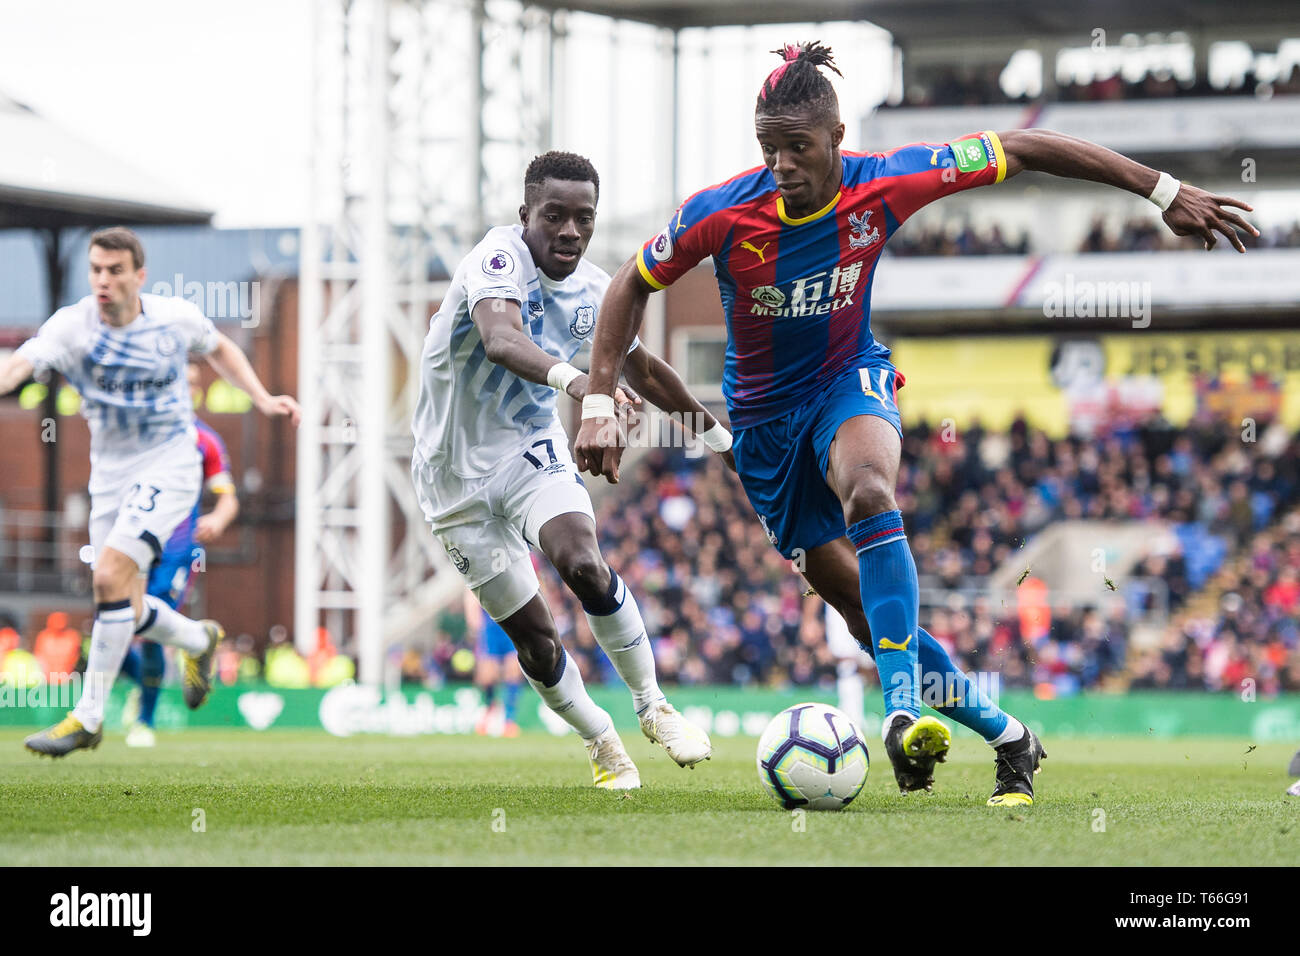 LONDON, ENGLAND - APRIL 27: Wilfried Zaha of Crystal Palace and Idrissa Gueye of Everton FC during the Premier League match between Crystal Palace and Everton FC at Selhurst Park on April 27, 2019 in London, United Kingdom. (Photo by Sebastian Frej/MB Media) Stock Photo